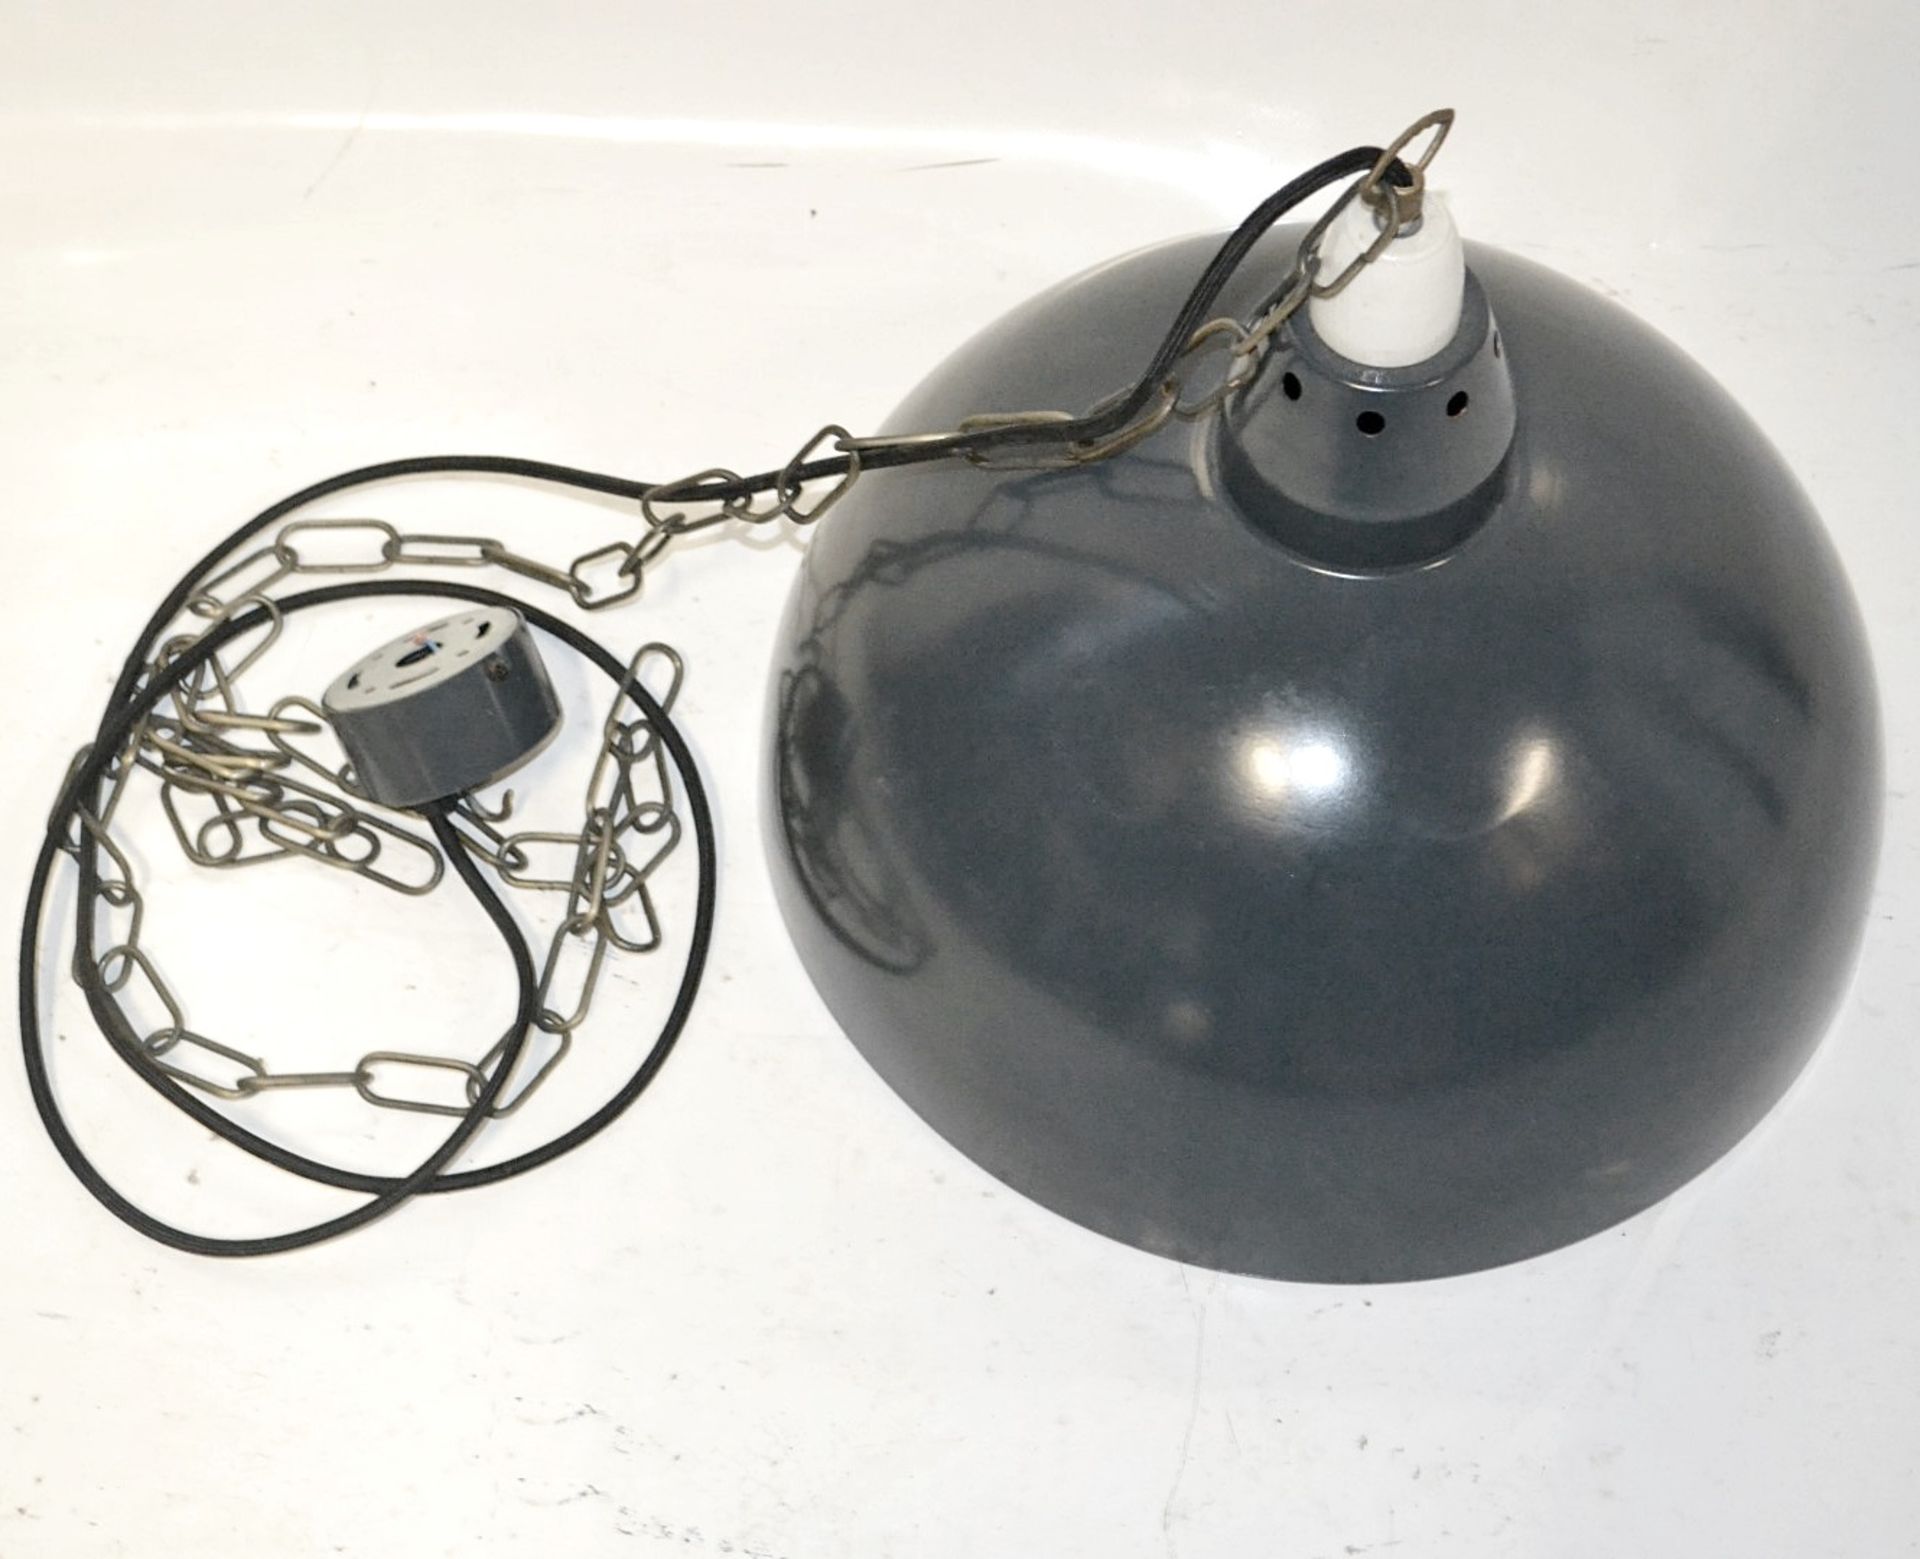 5 x Dome Pendant Ceiling Light Fittings With Chain And Black Fabric Flex - CL353 - Image 2 of 6